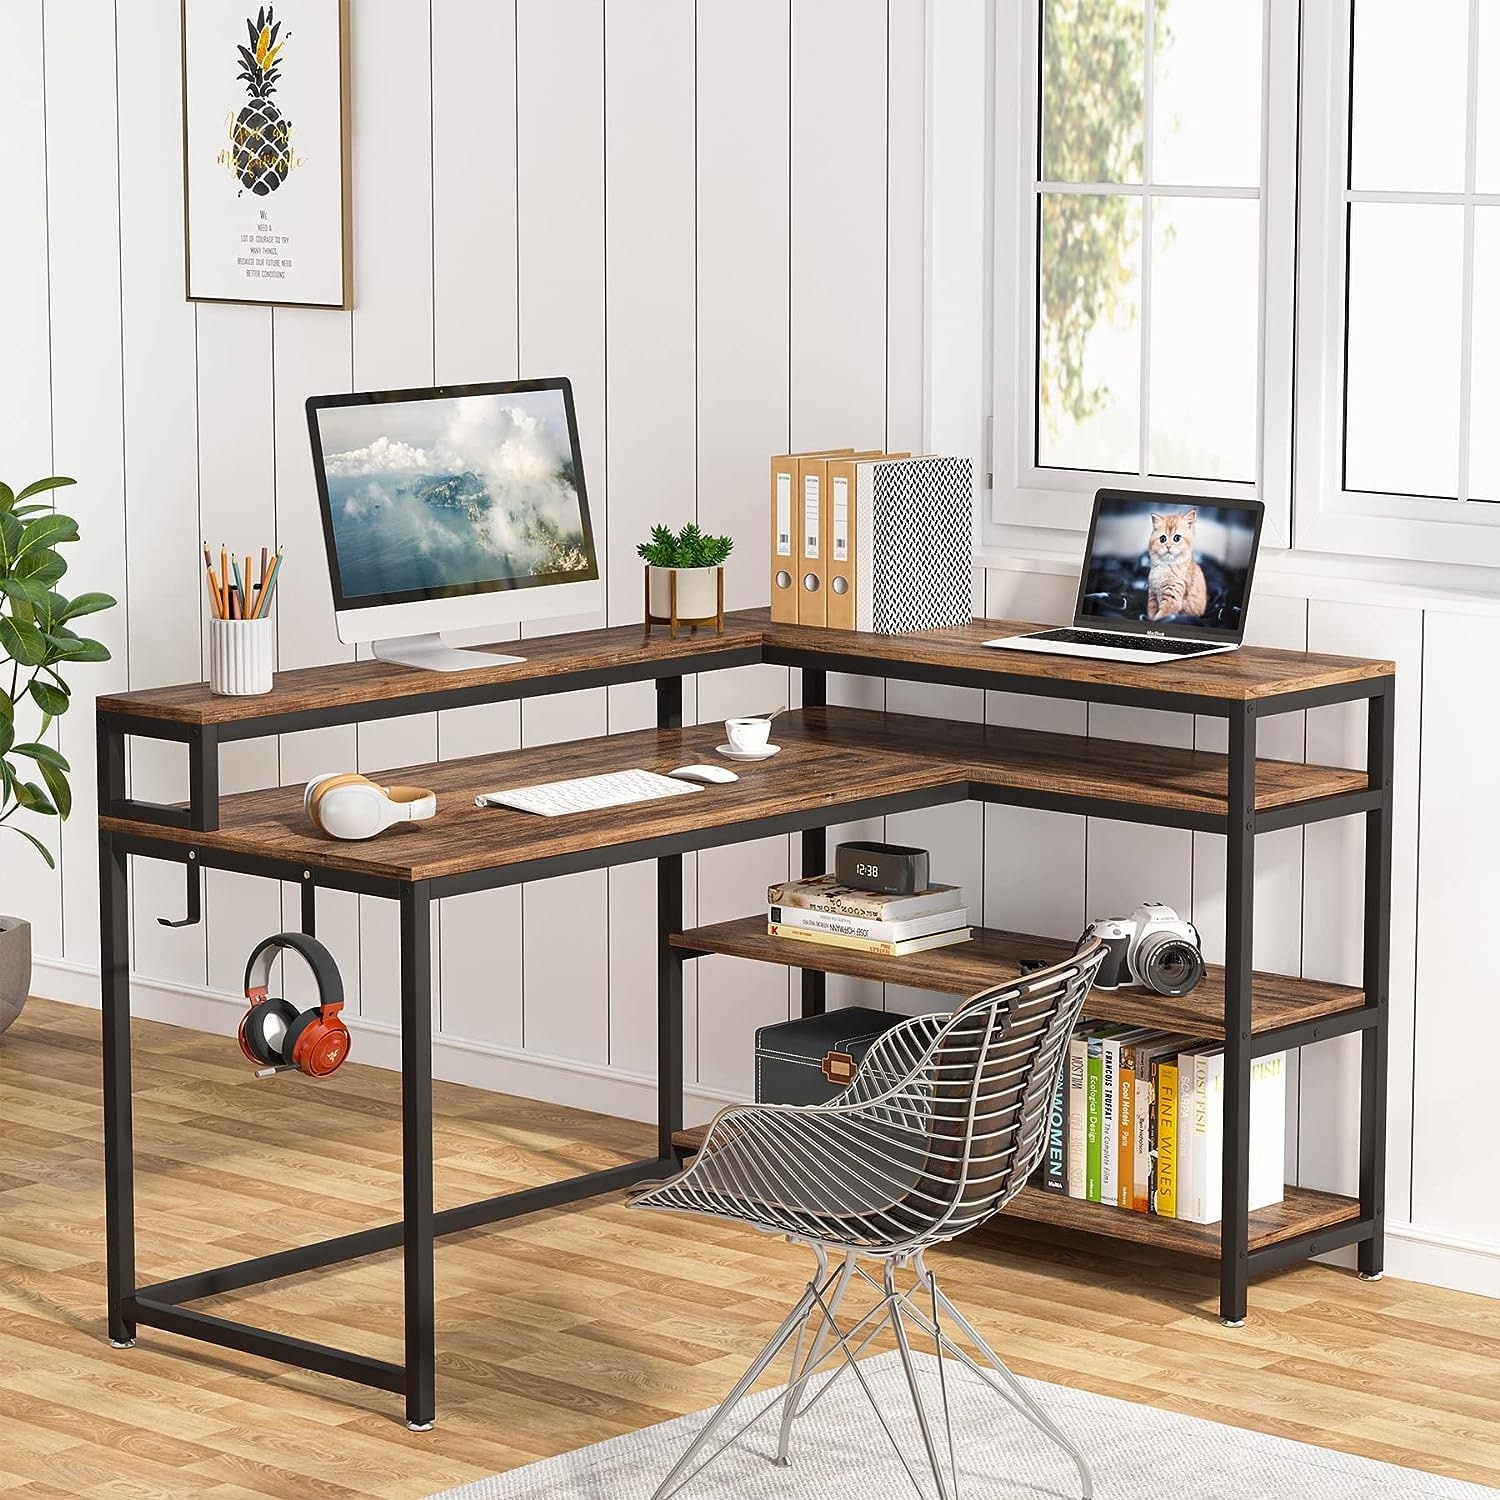 https://ak1.ostkcdn.com/images/products/is/images/direct/d8782382538b69ebd34a504b1abe3bdb9066979d/55-53-inch-Reversible-L-Shaped-Desk-with-Storage-Shelf-and-Monitor-Stand%2CCorner-Desk.jpg